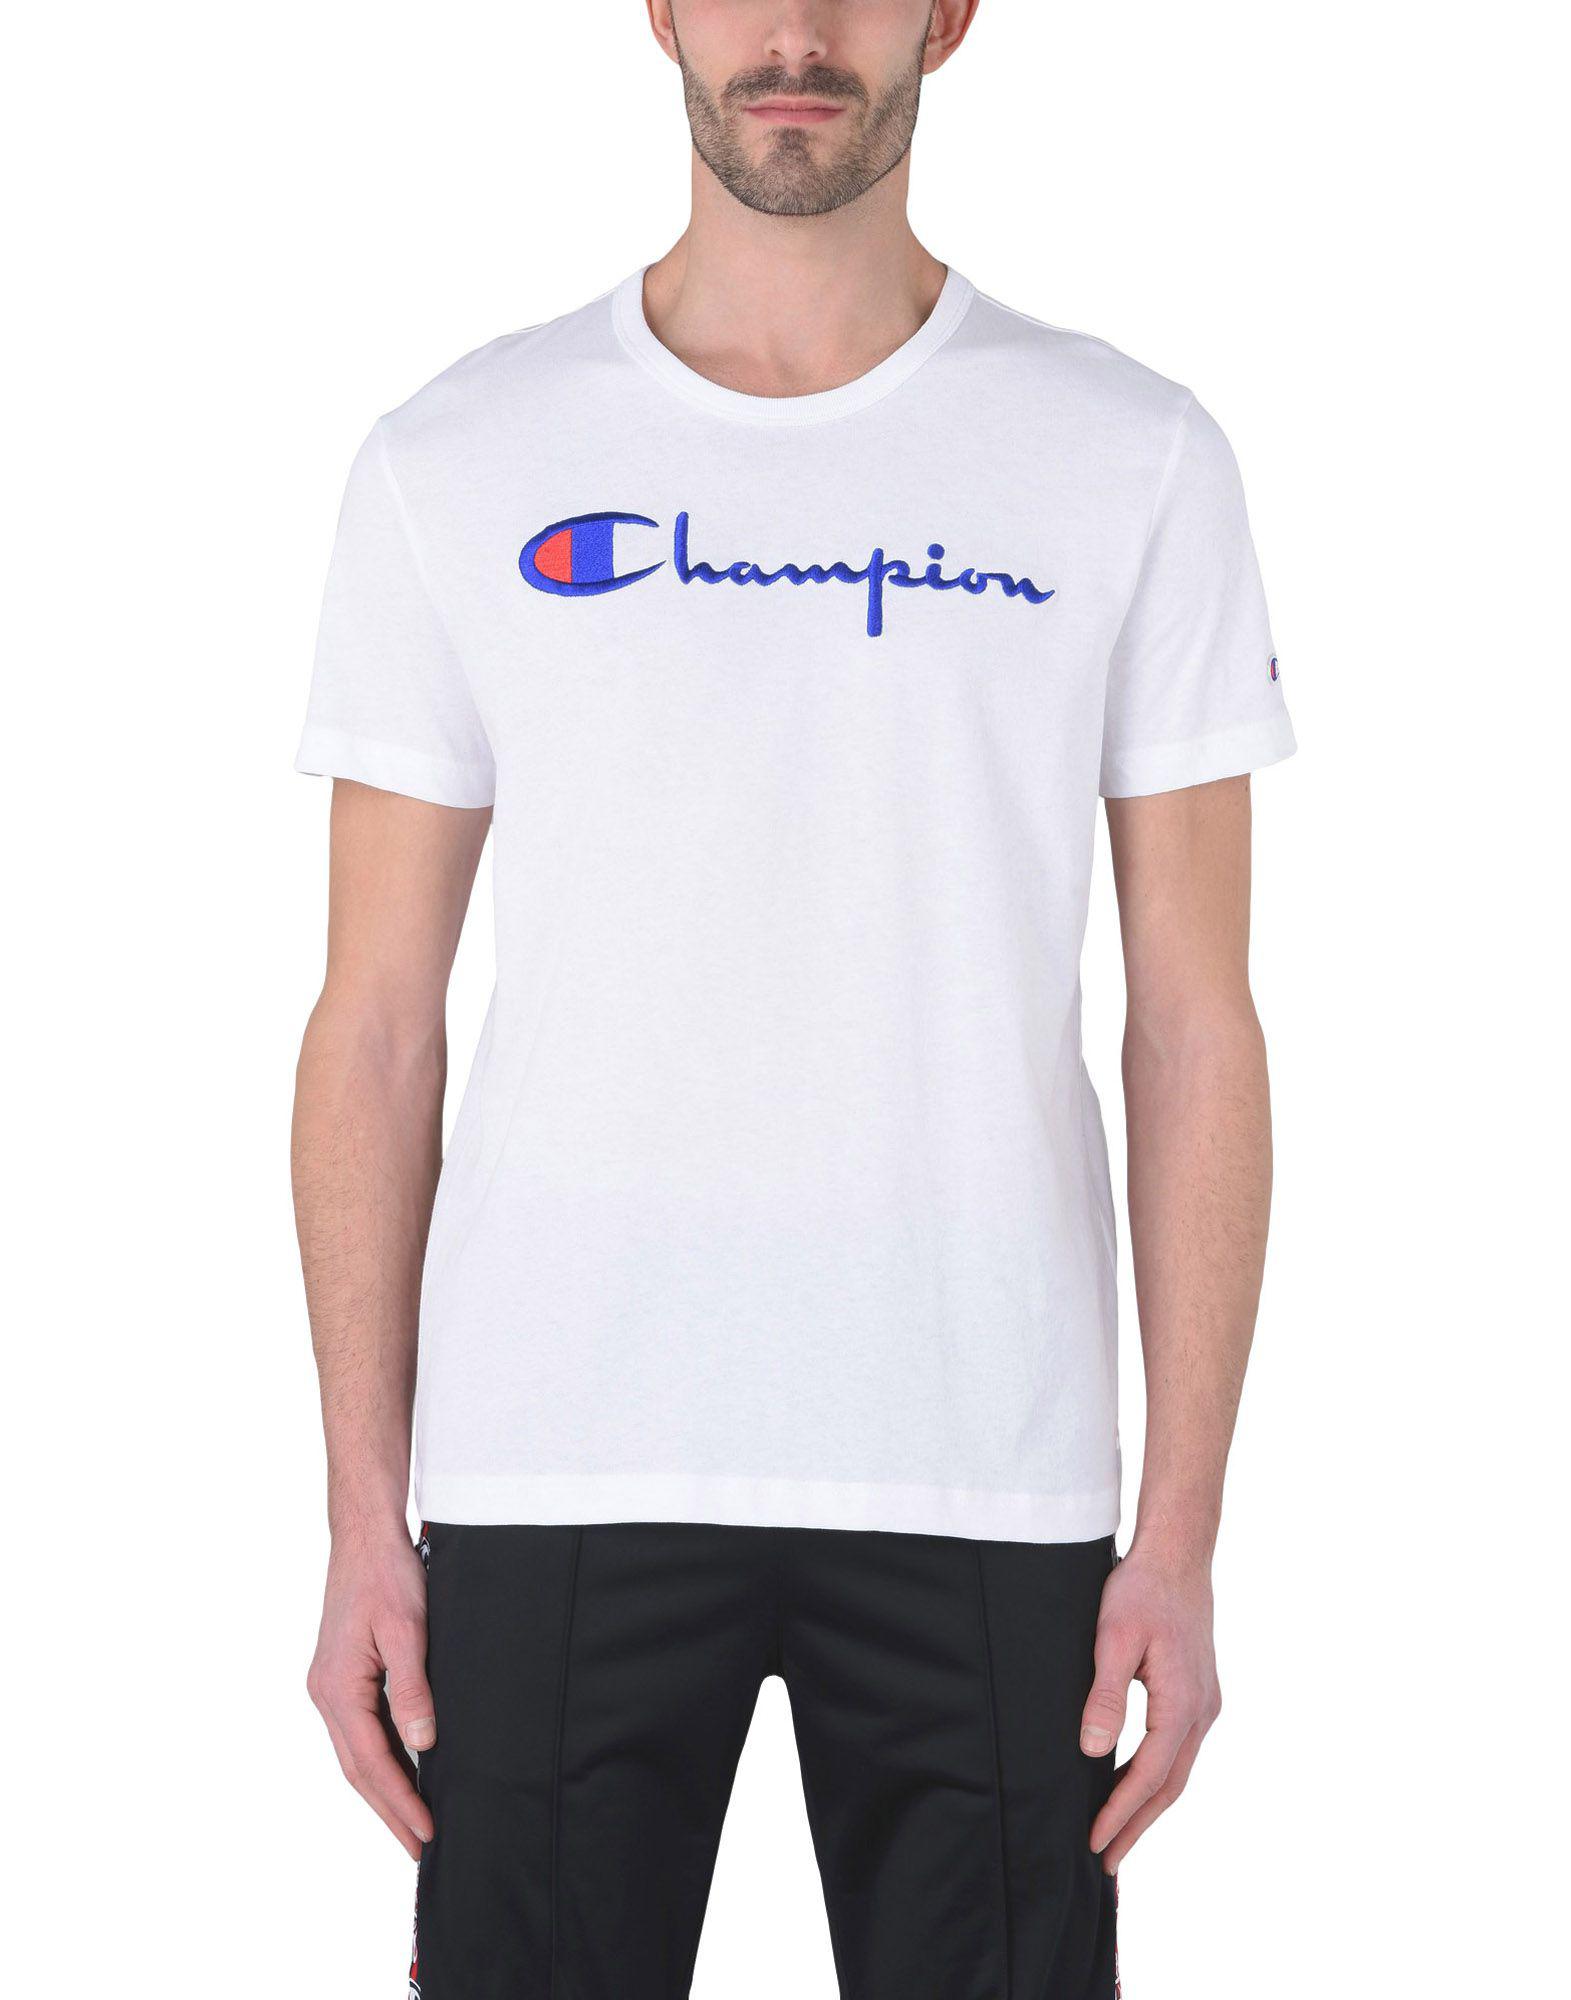 Champion Cotton T-shirt in White for Men - Save 26% - Lyst